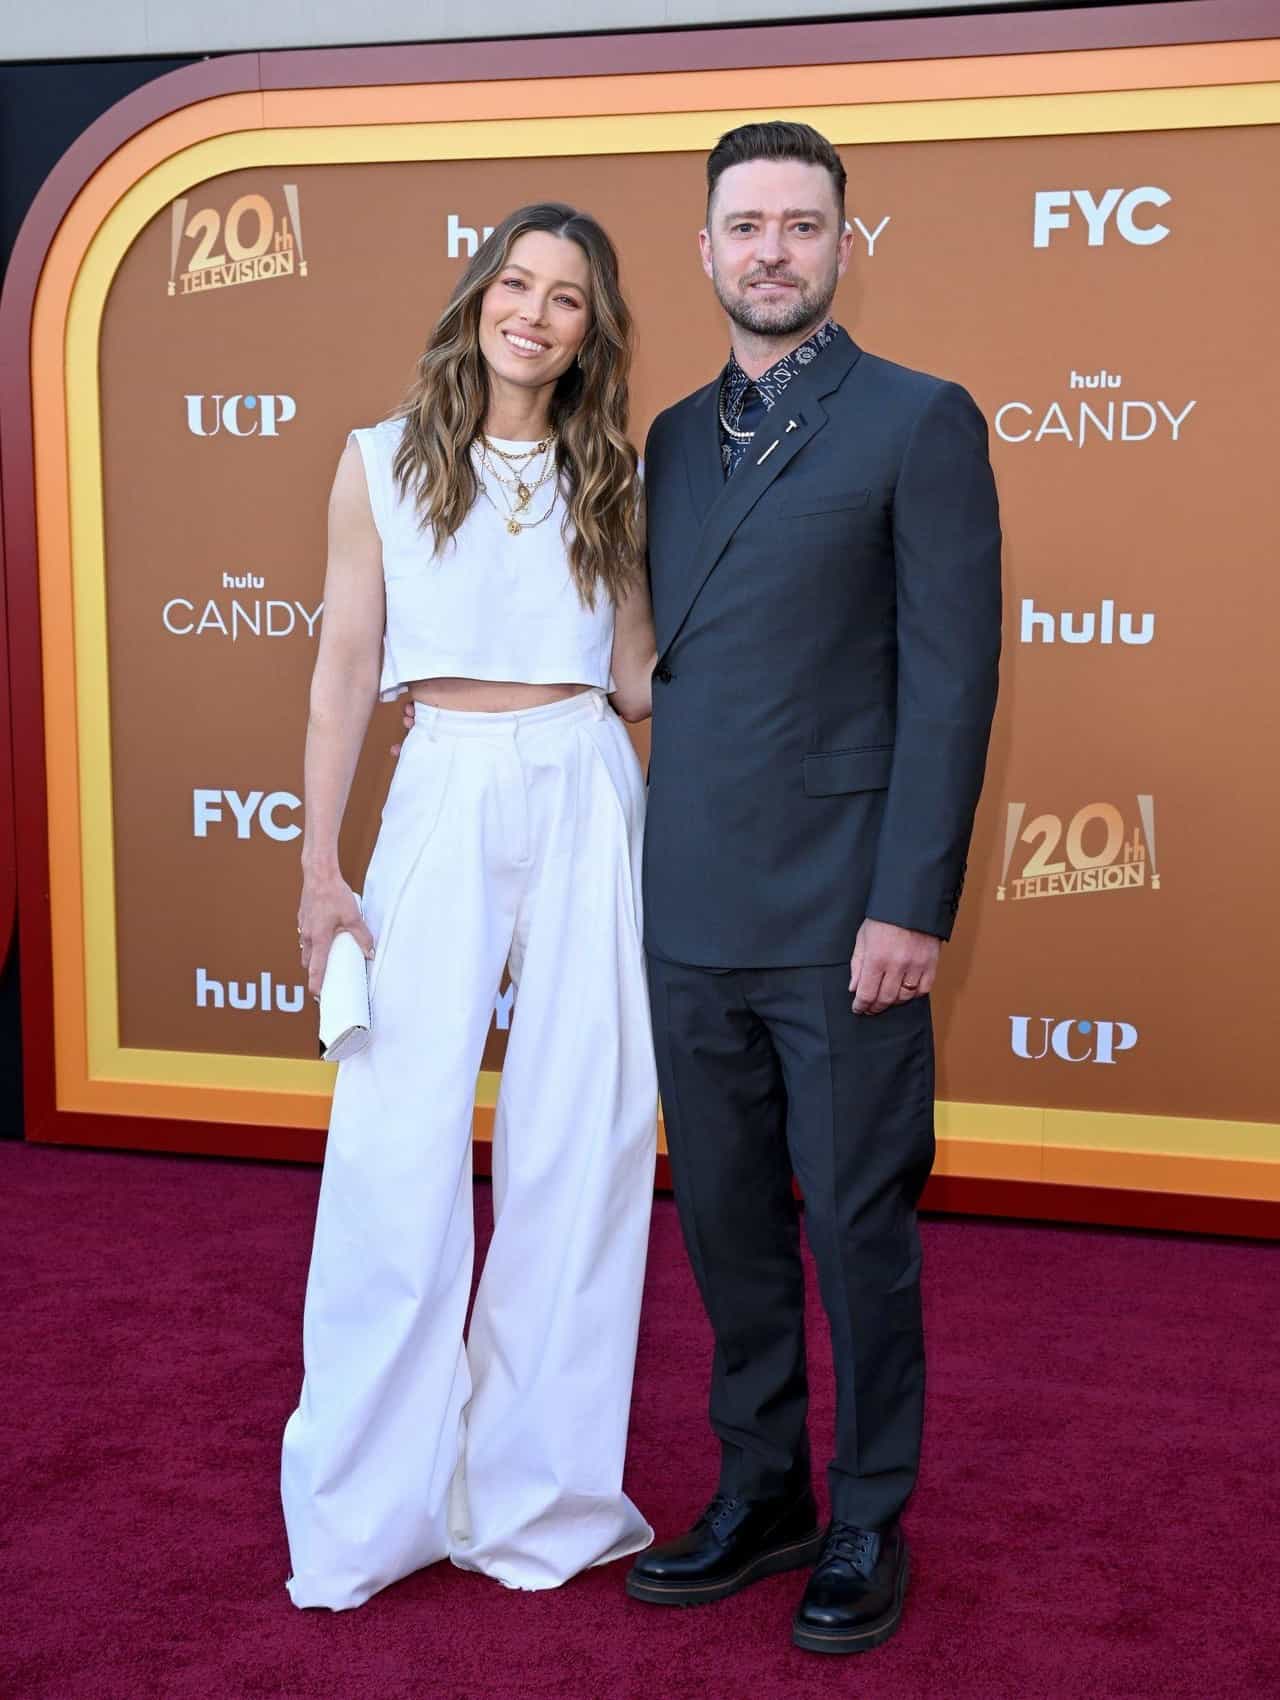 Jessica Biel Looks Mesmerizing in All-White at "Candy" FYC Event